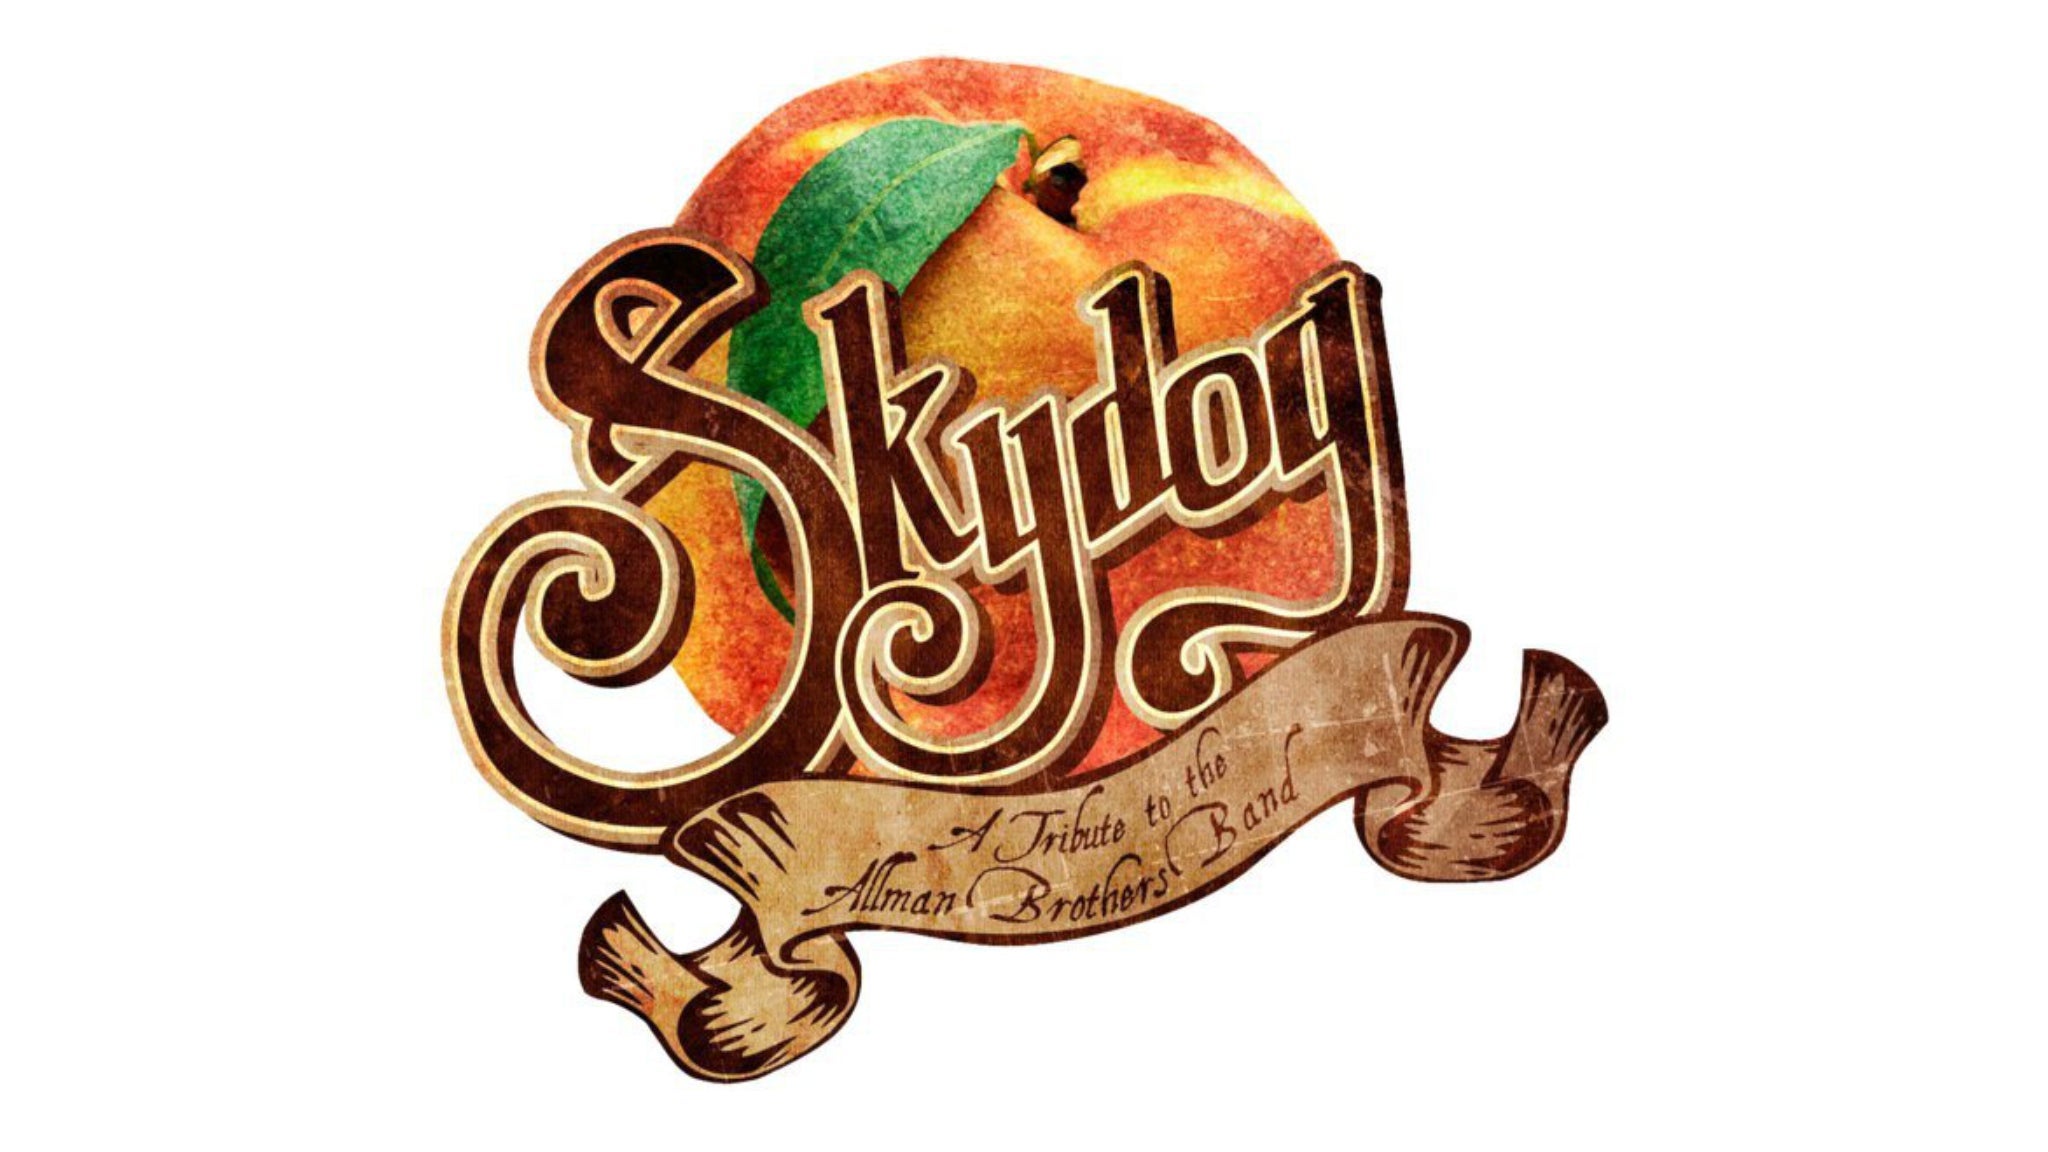 An Evening With Skydog: A Tribute to The Allman Brothers Band